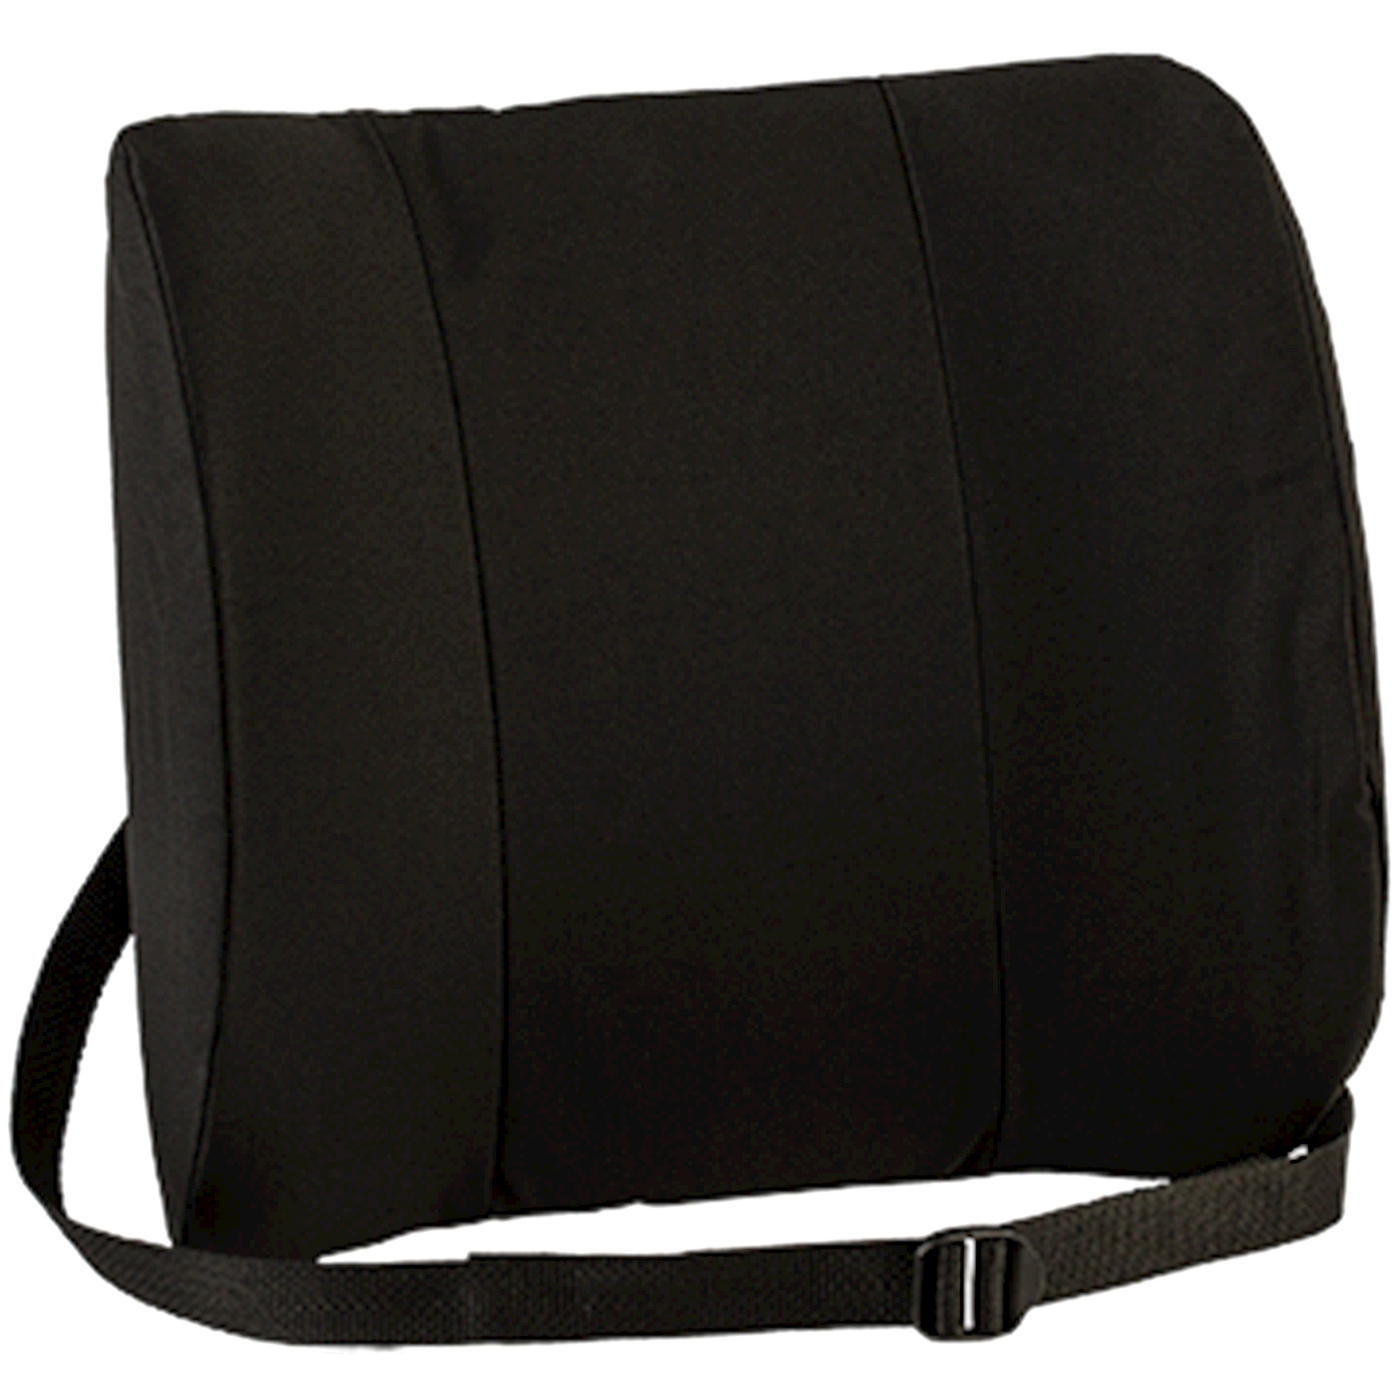 Sitback Rest Lumbar Support Curated Wellness